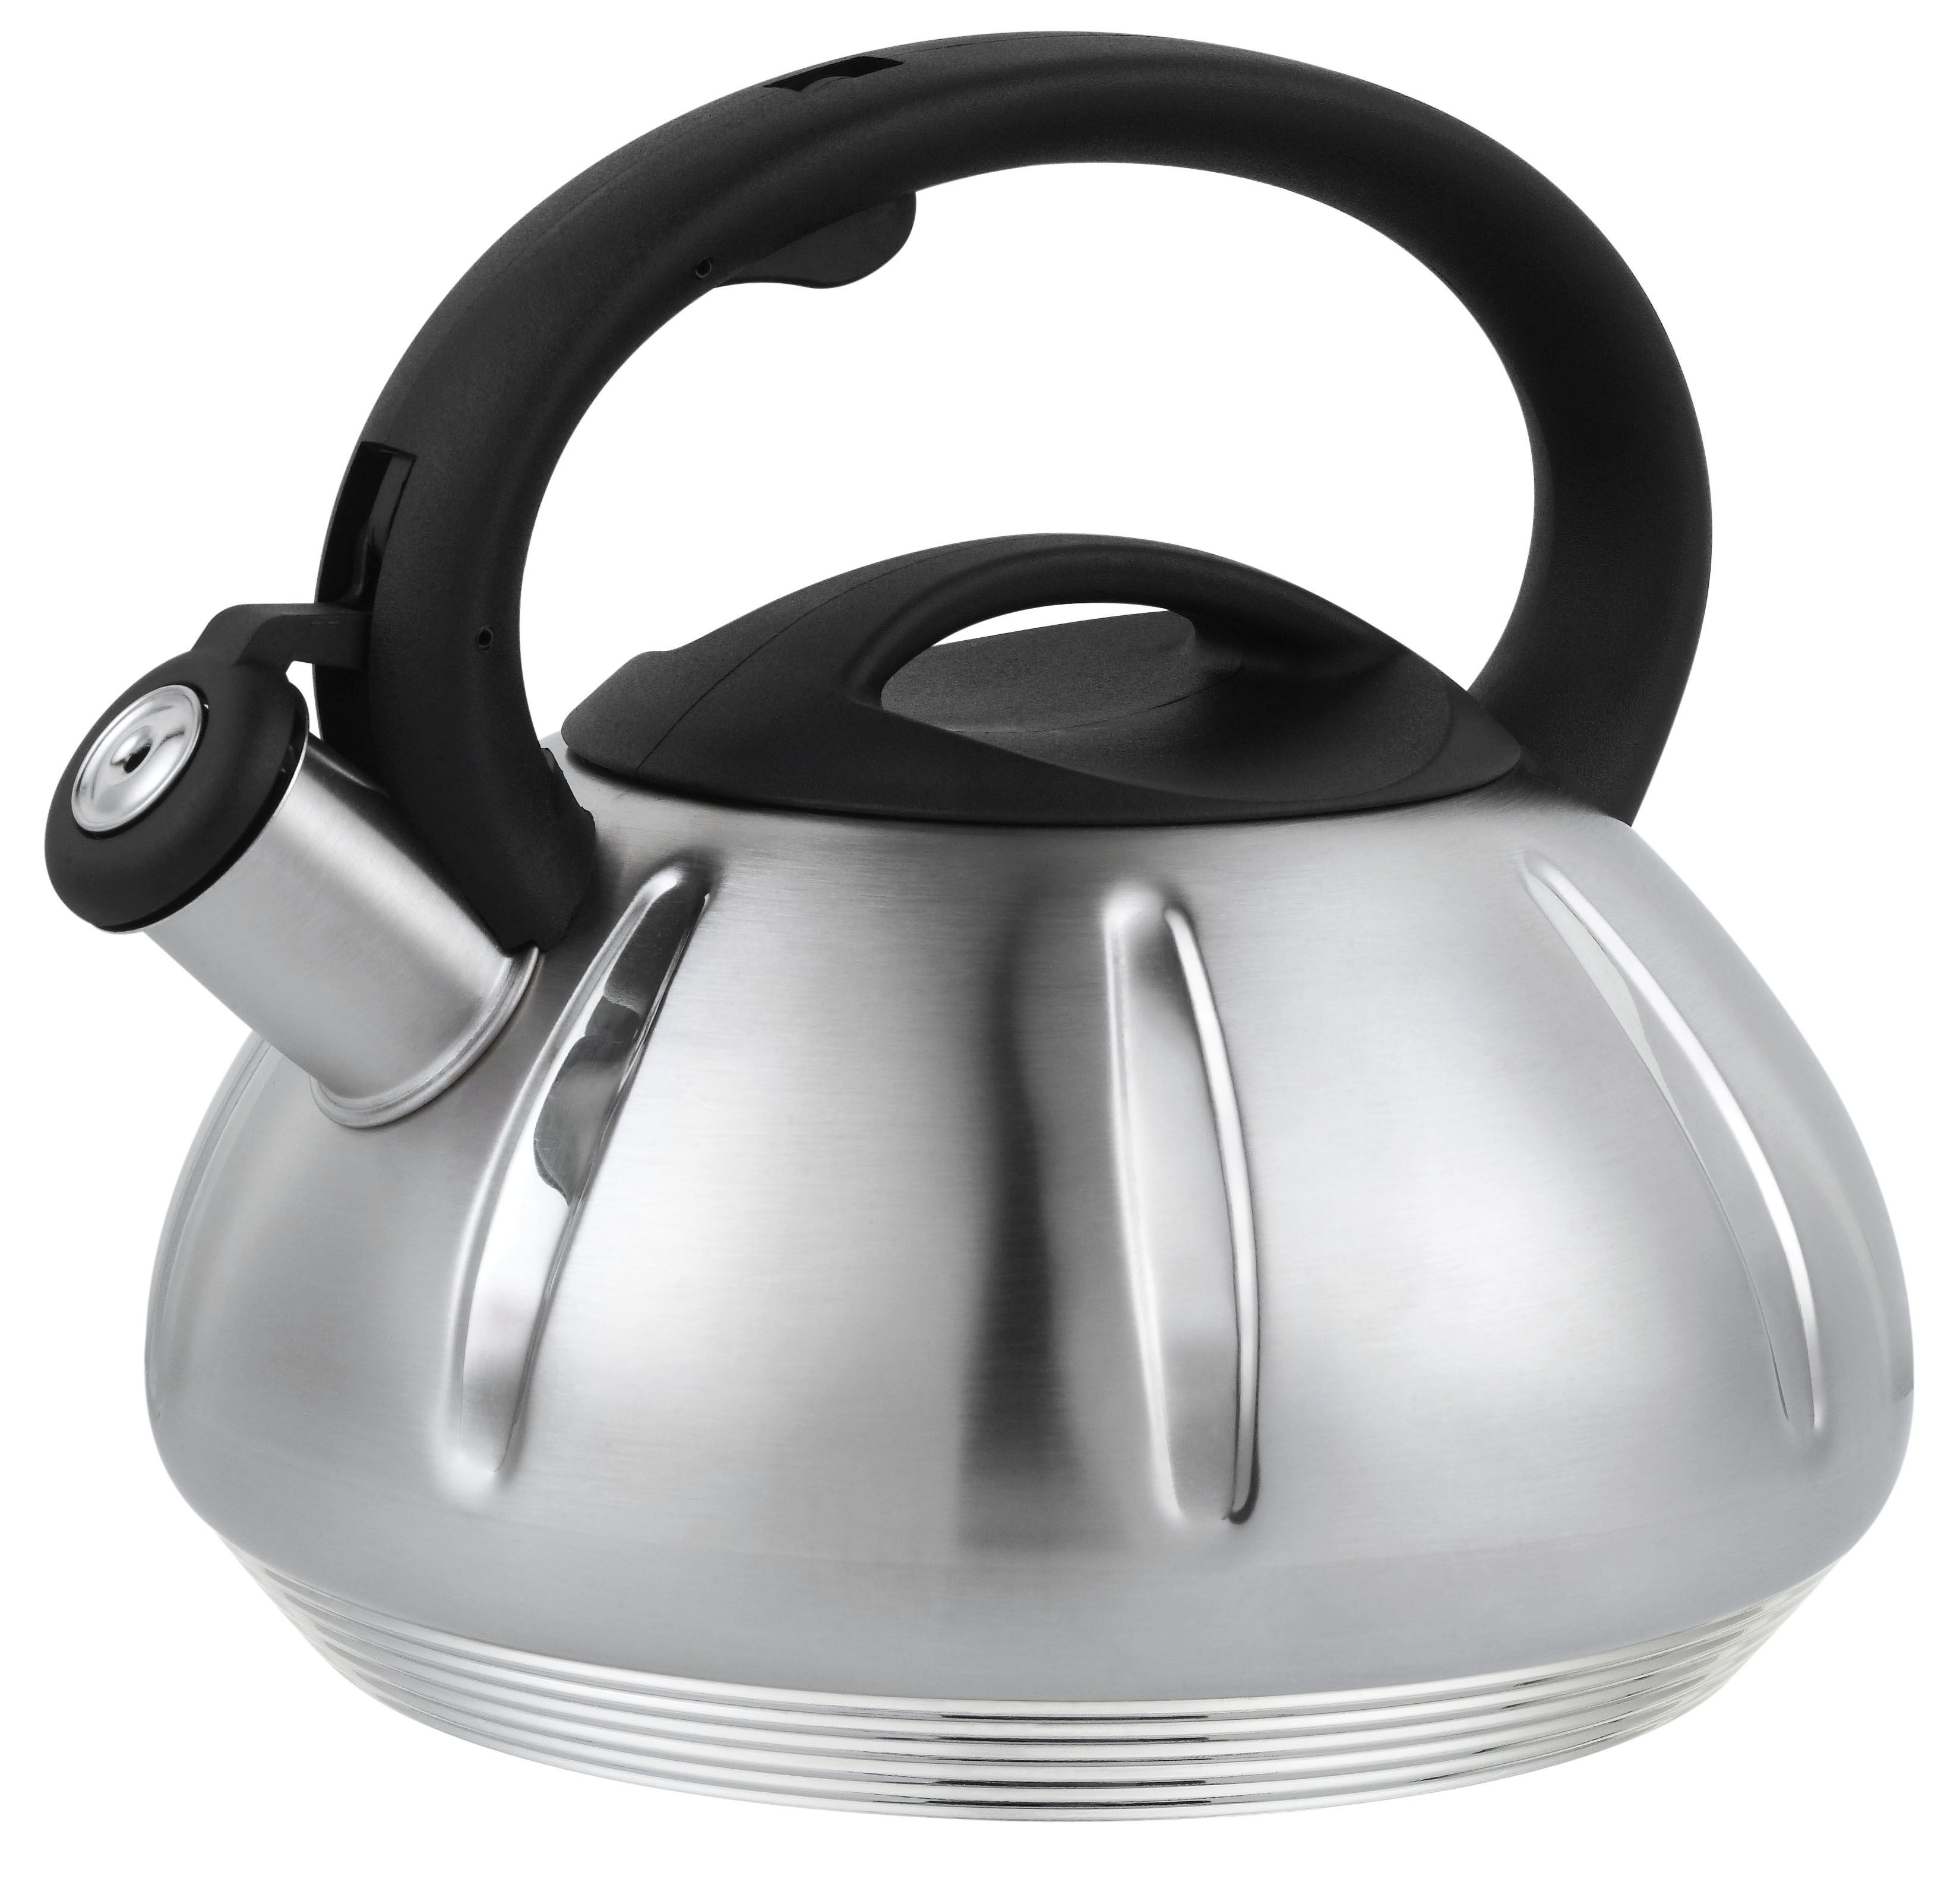 How to Stop an Electric Kettle Whistling Noise